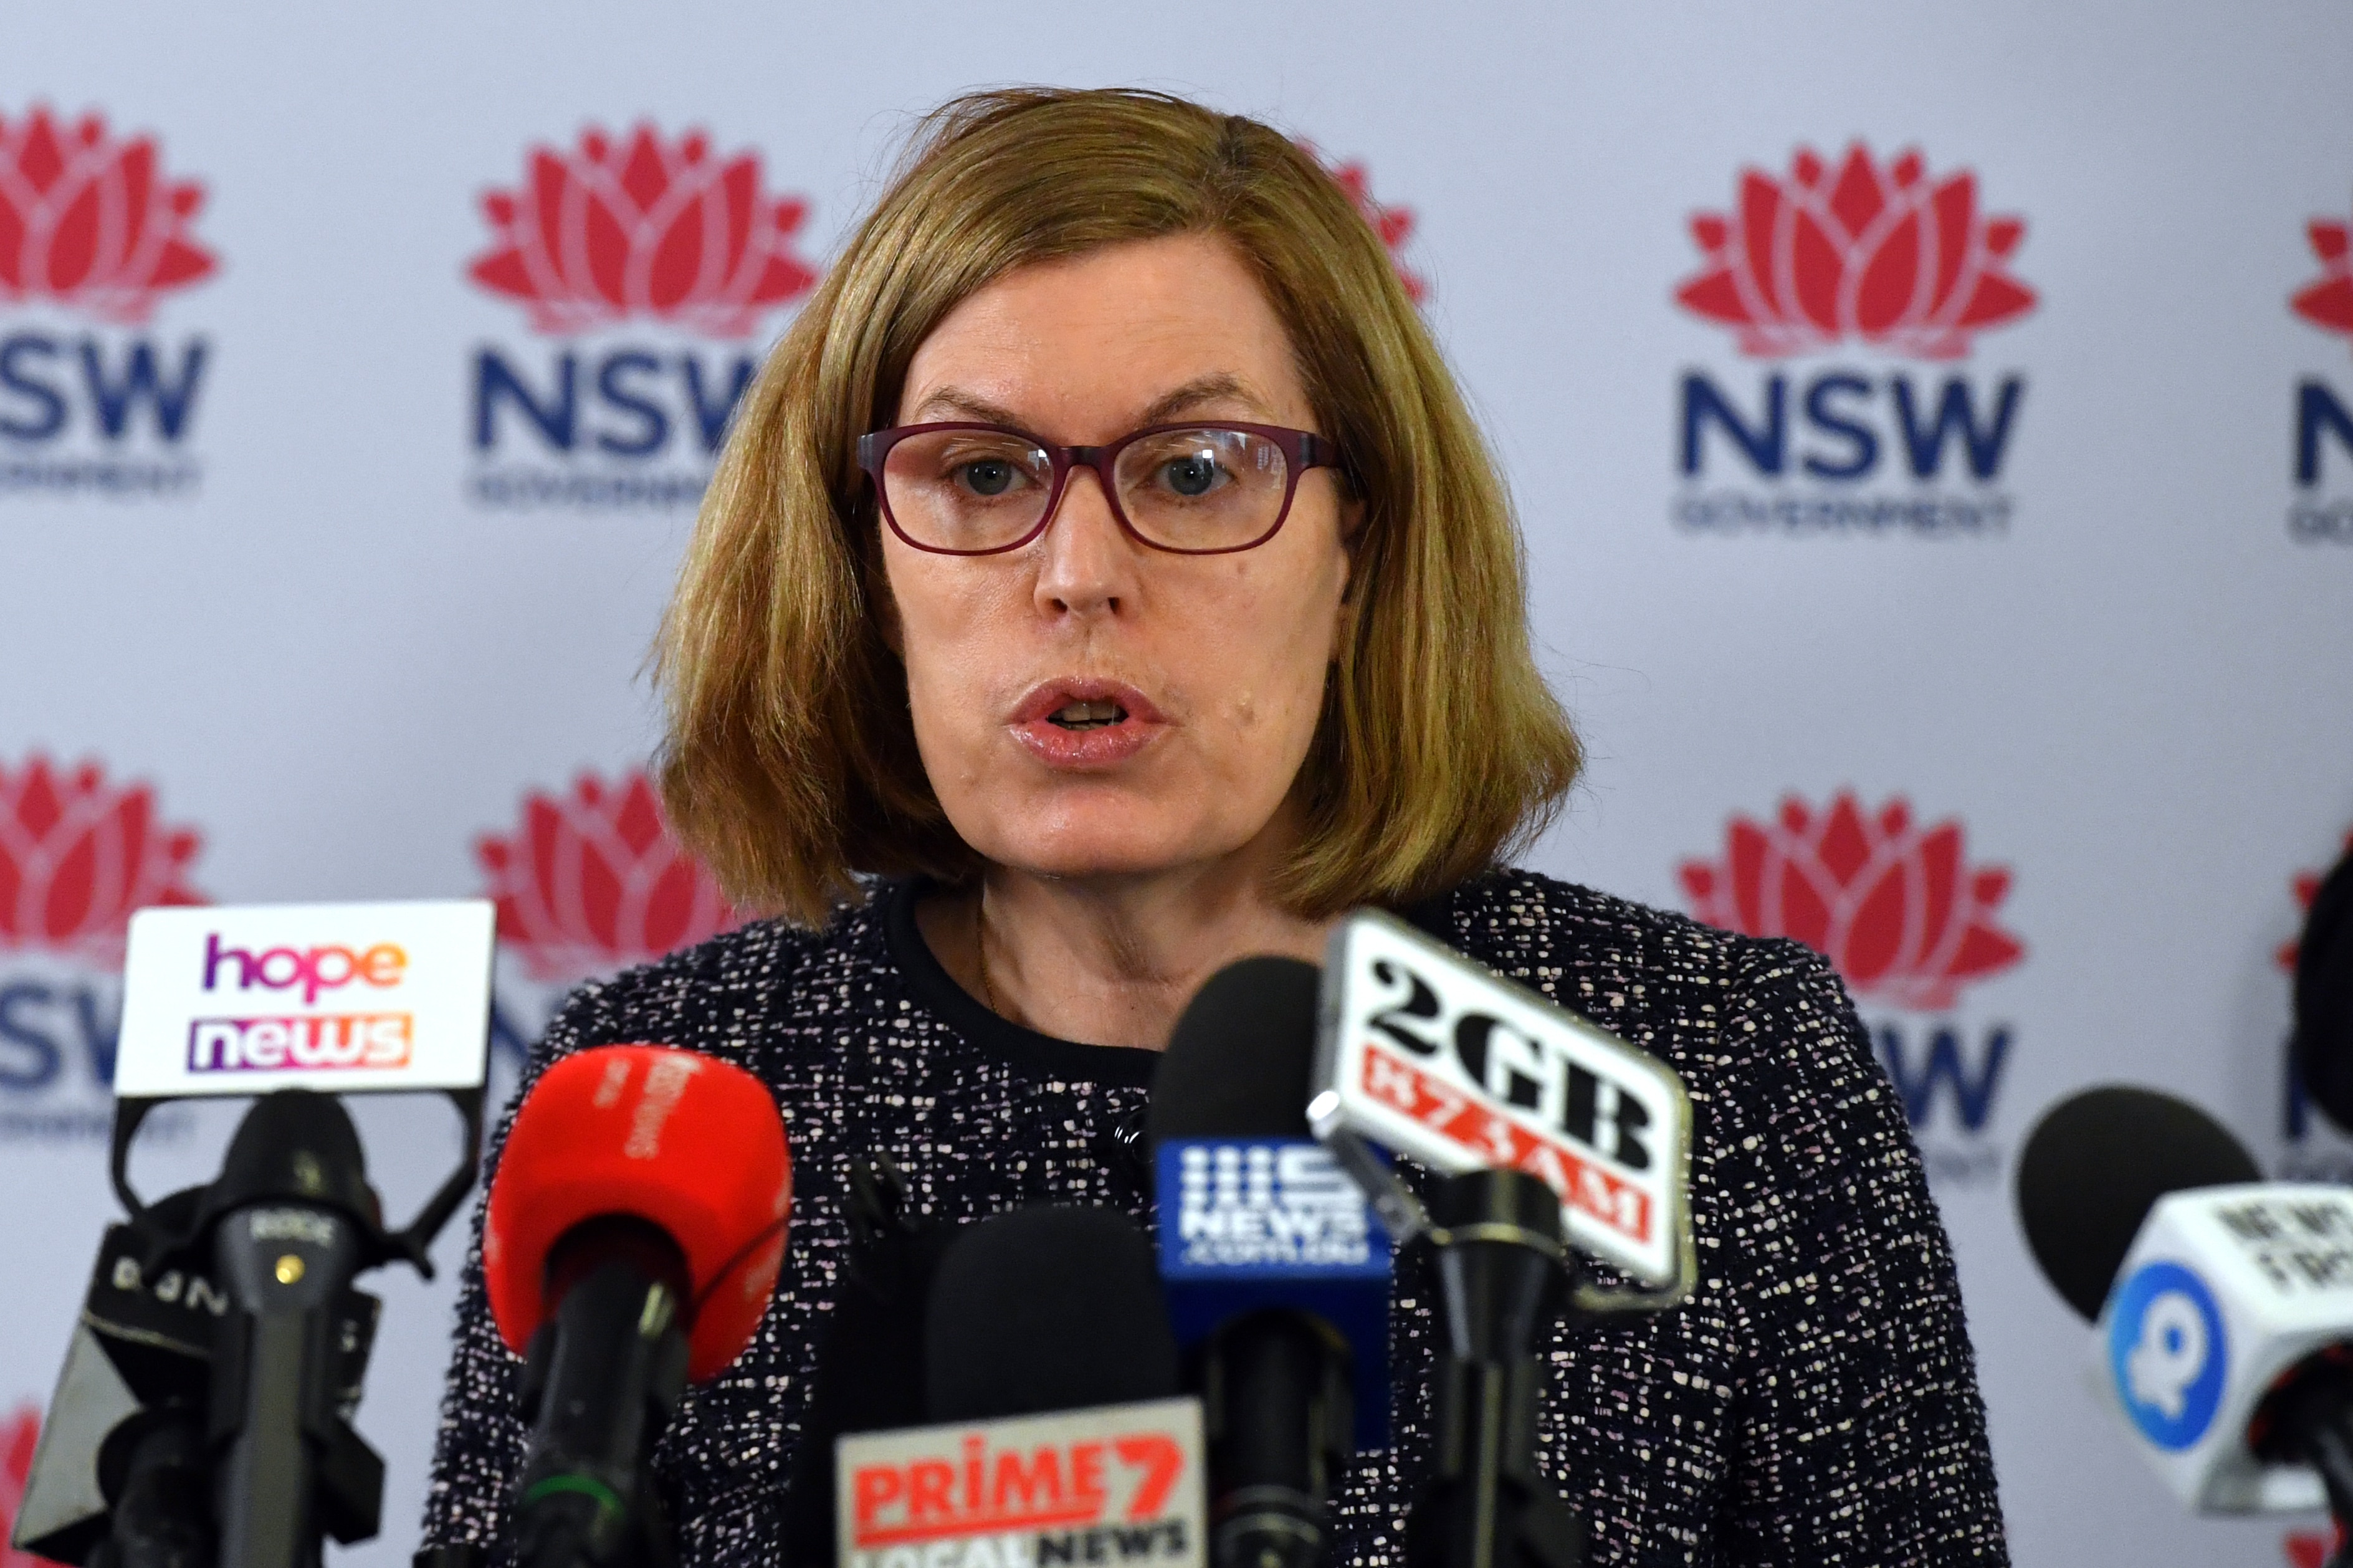 NSW Chief Health Officer Dr Kerry Chant speaks to the media at a press conference in Sydney, Tuesday, November 2, 2021. (AAP Image/Mick Tsikas) NO ARCHIVING